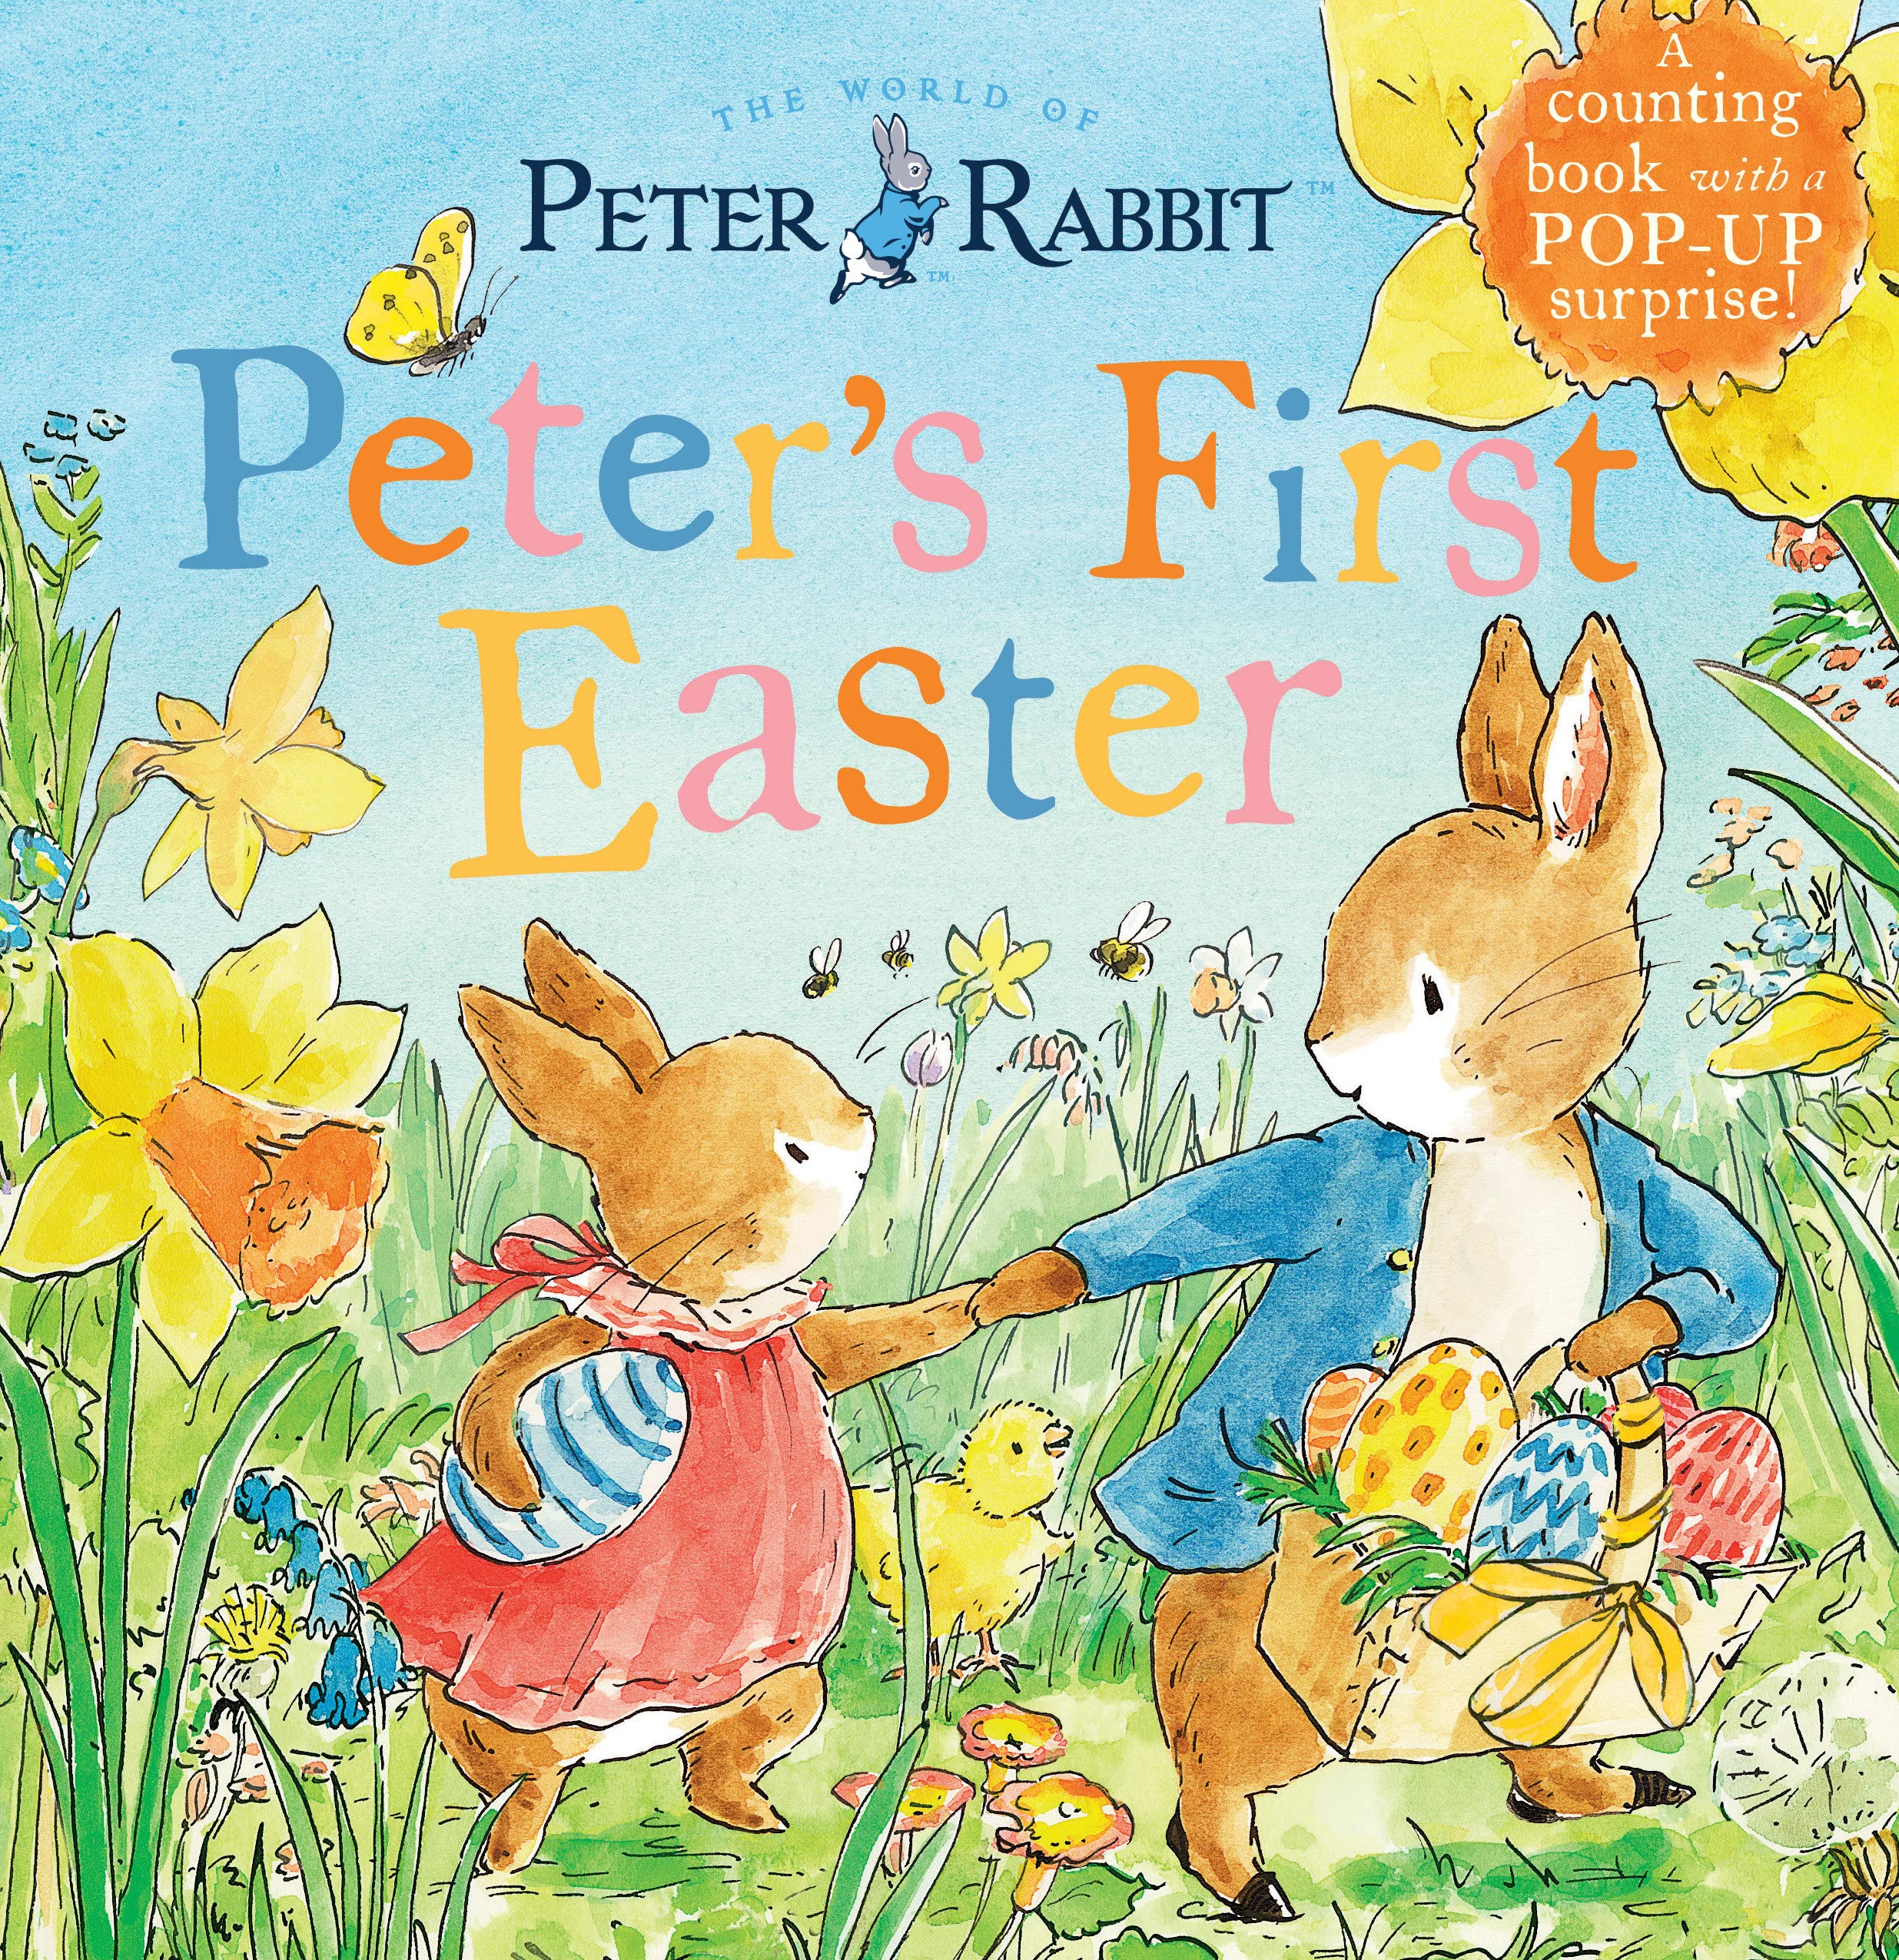 Peter's First Easter: A Counting Book with a Pop-Up Surprise! (Peter Rabbit)